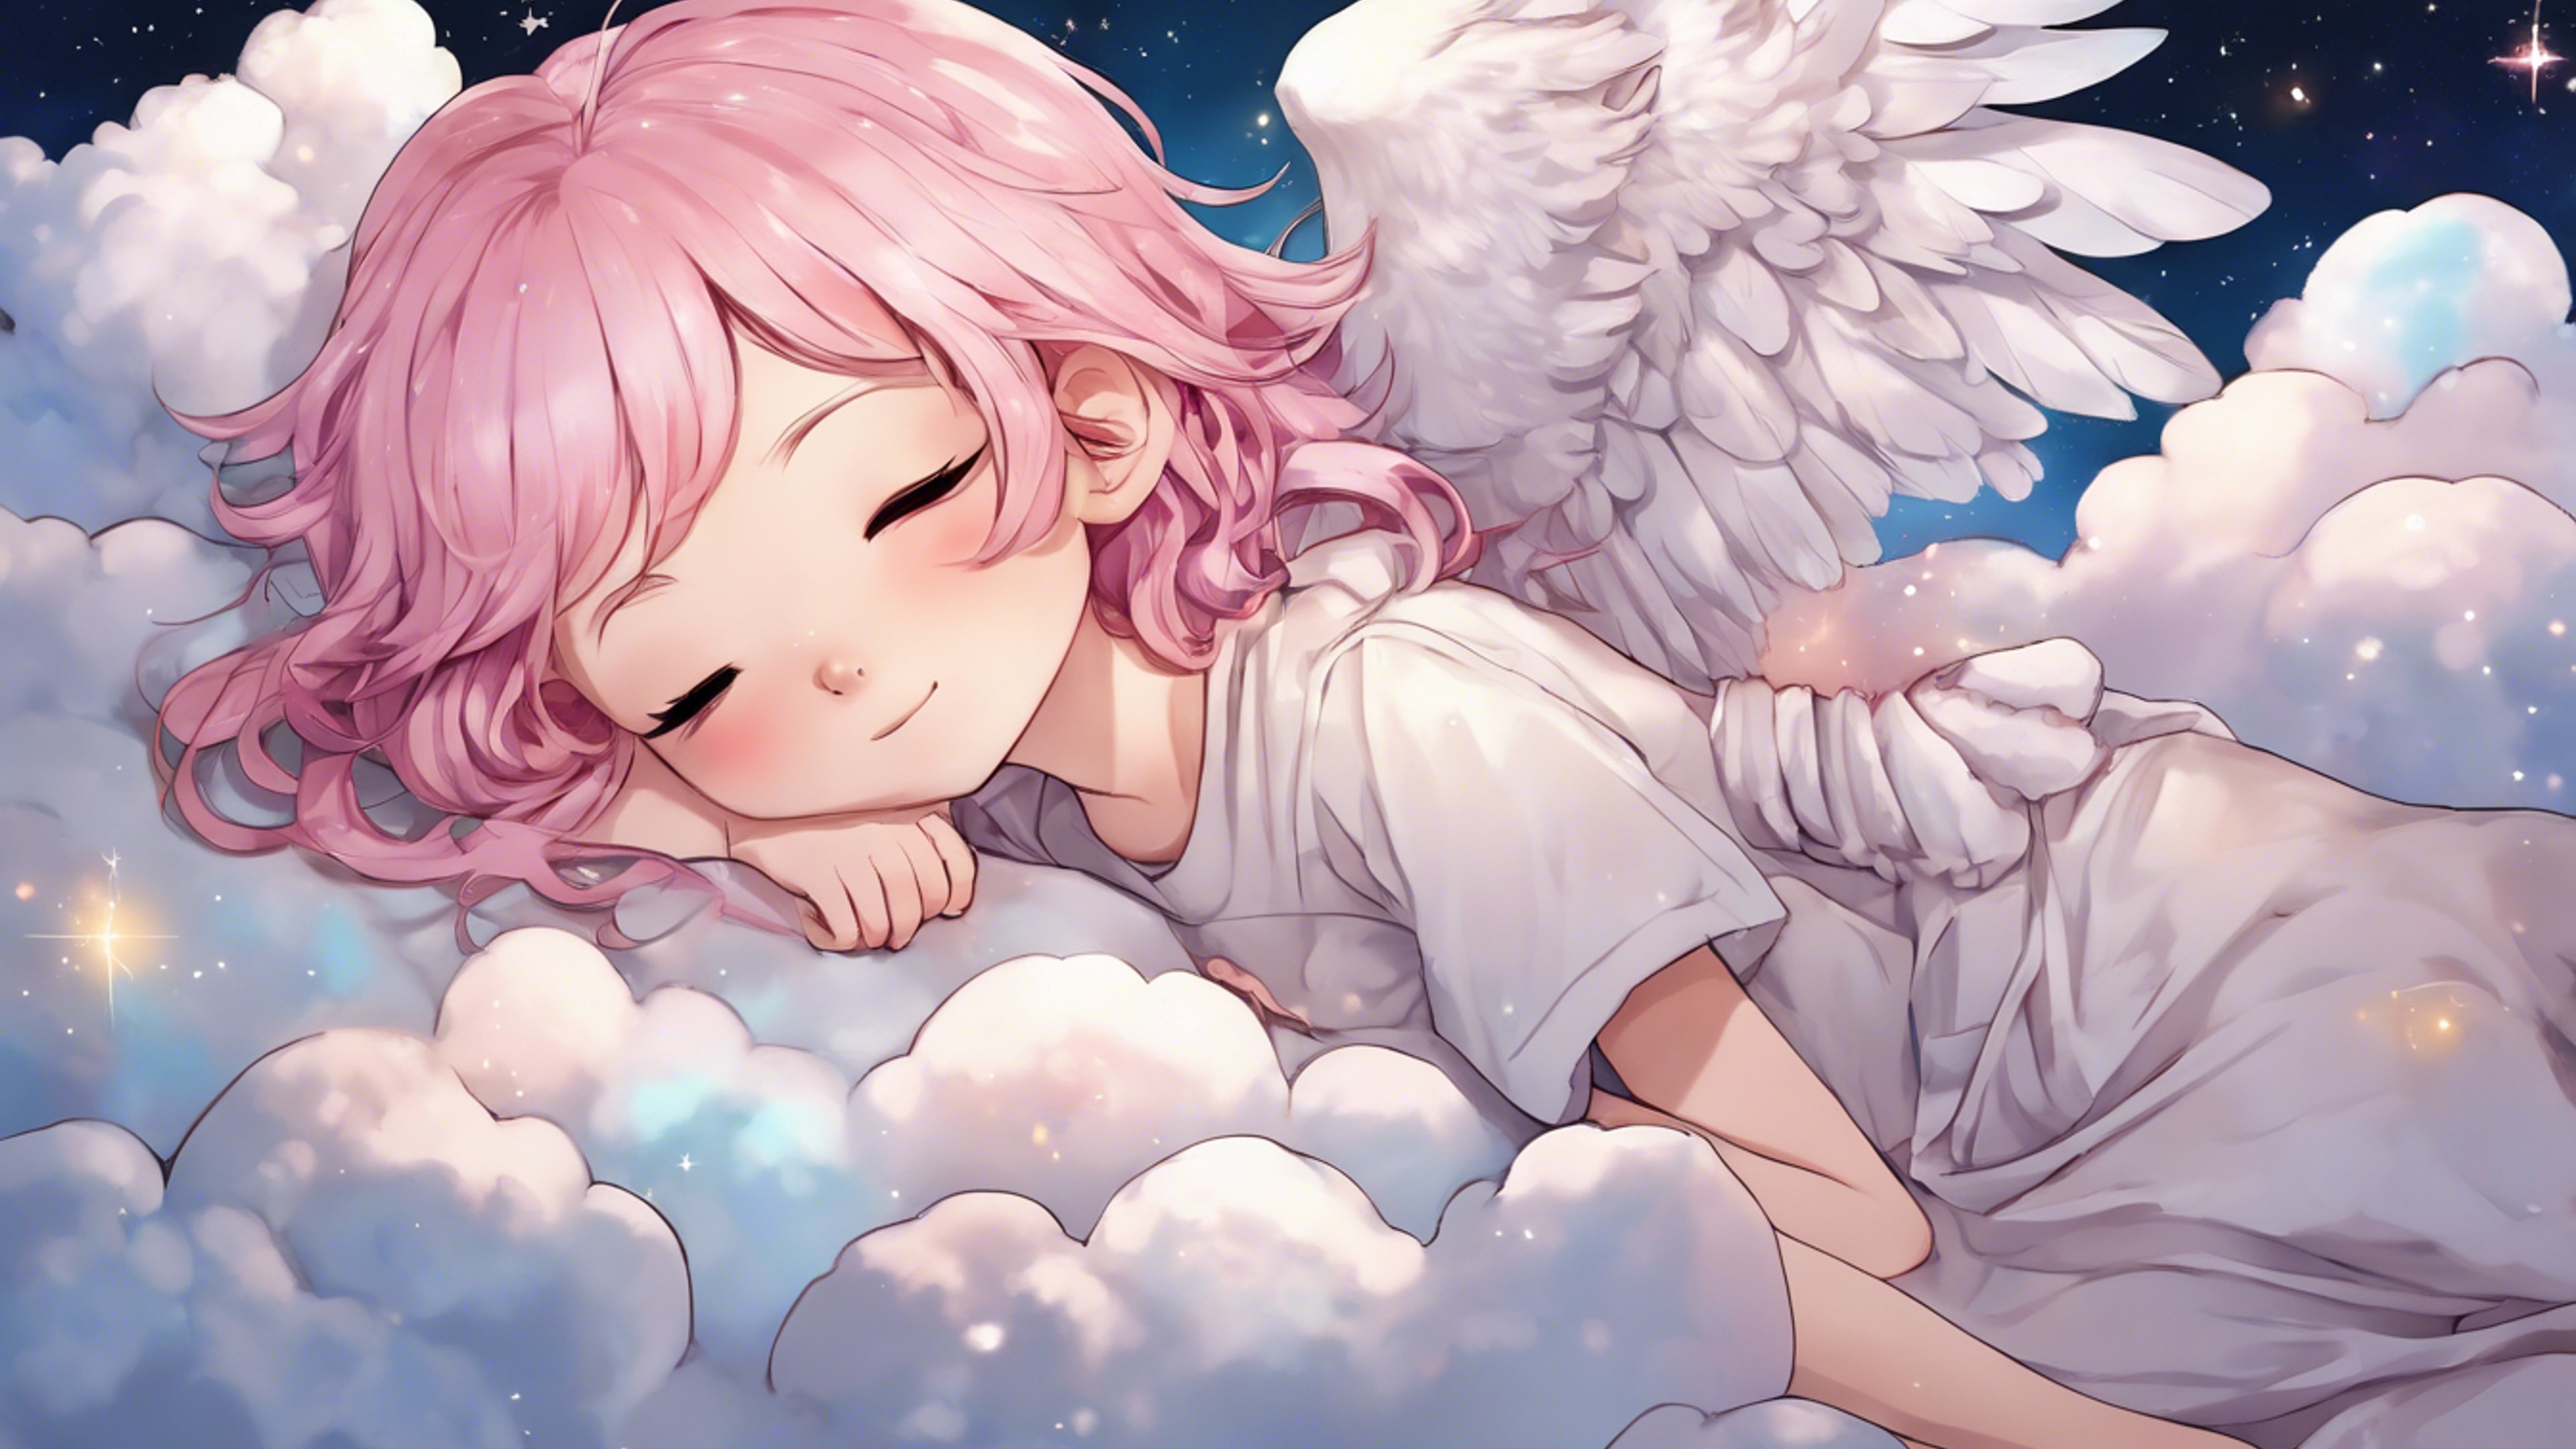 A chibi-style anime girl with pastel pink hair and angel wings, sleeping peacefully on a fluffy cloud under a starry night sky. Шпалери[4a6f35b80bd74bd2872d]